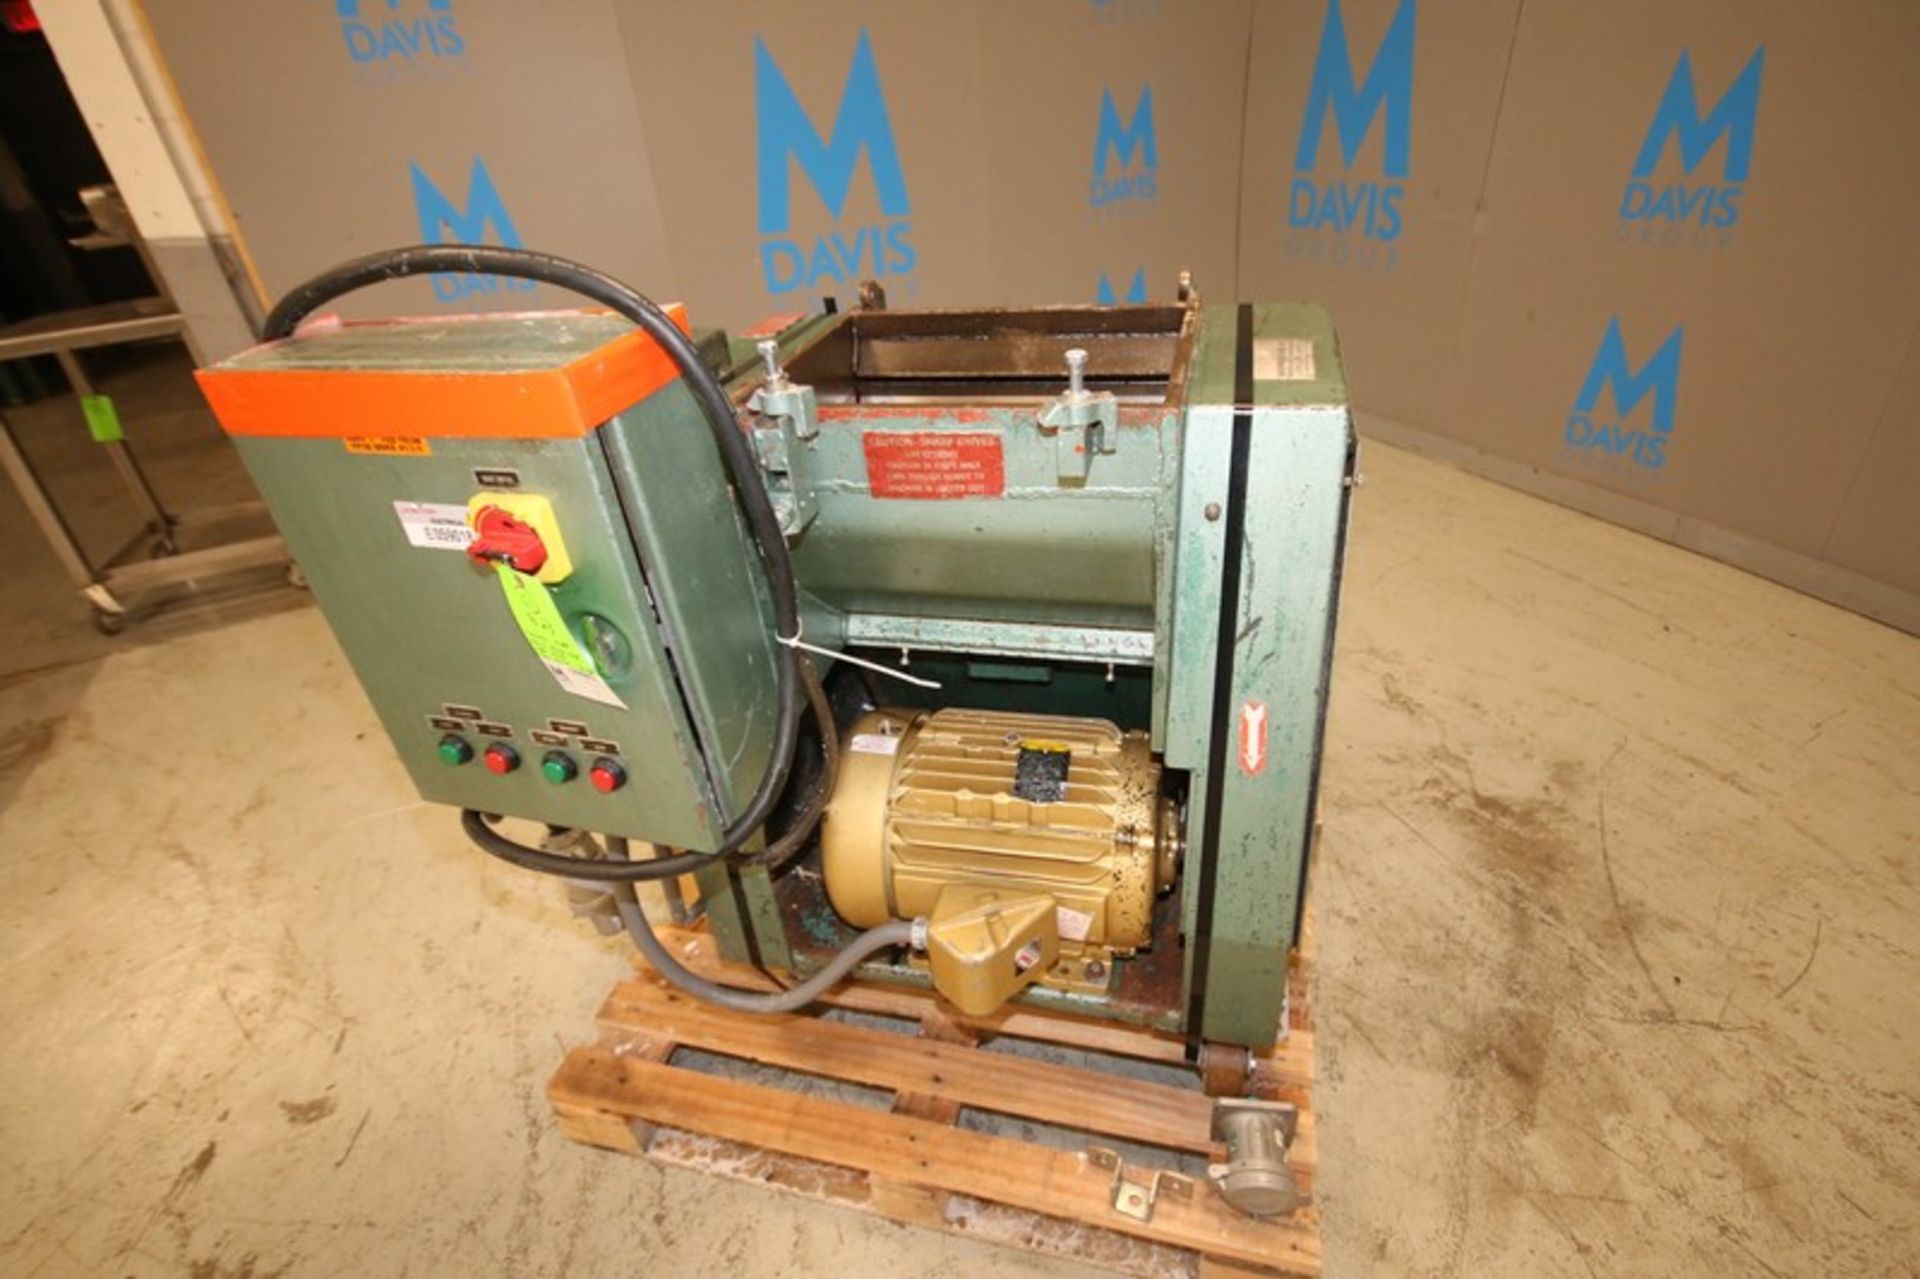 Foremost HDPE Resin Regrinder, Model SHD6, SN 26511, with 20hp/1765 rpm Motor with Controls, 230/